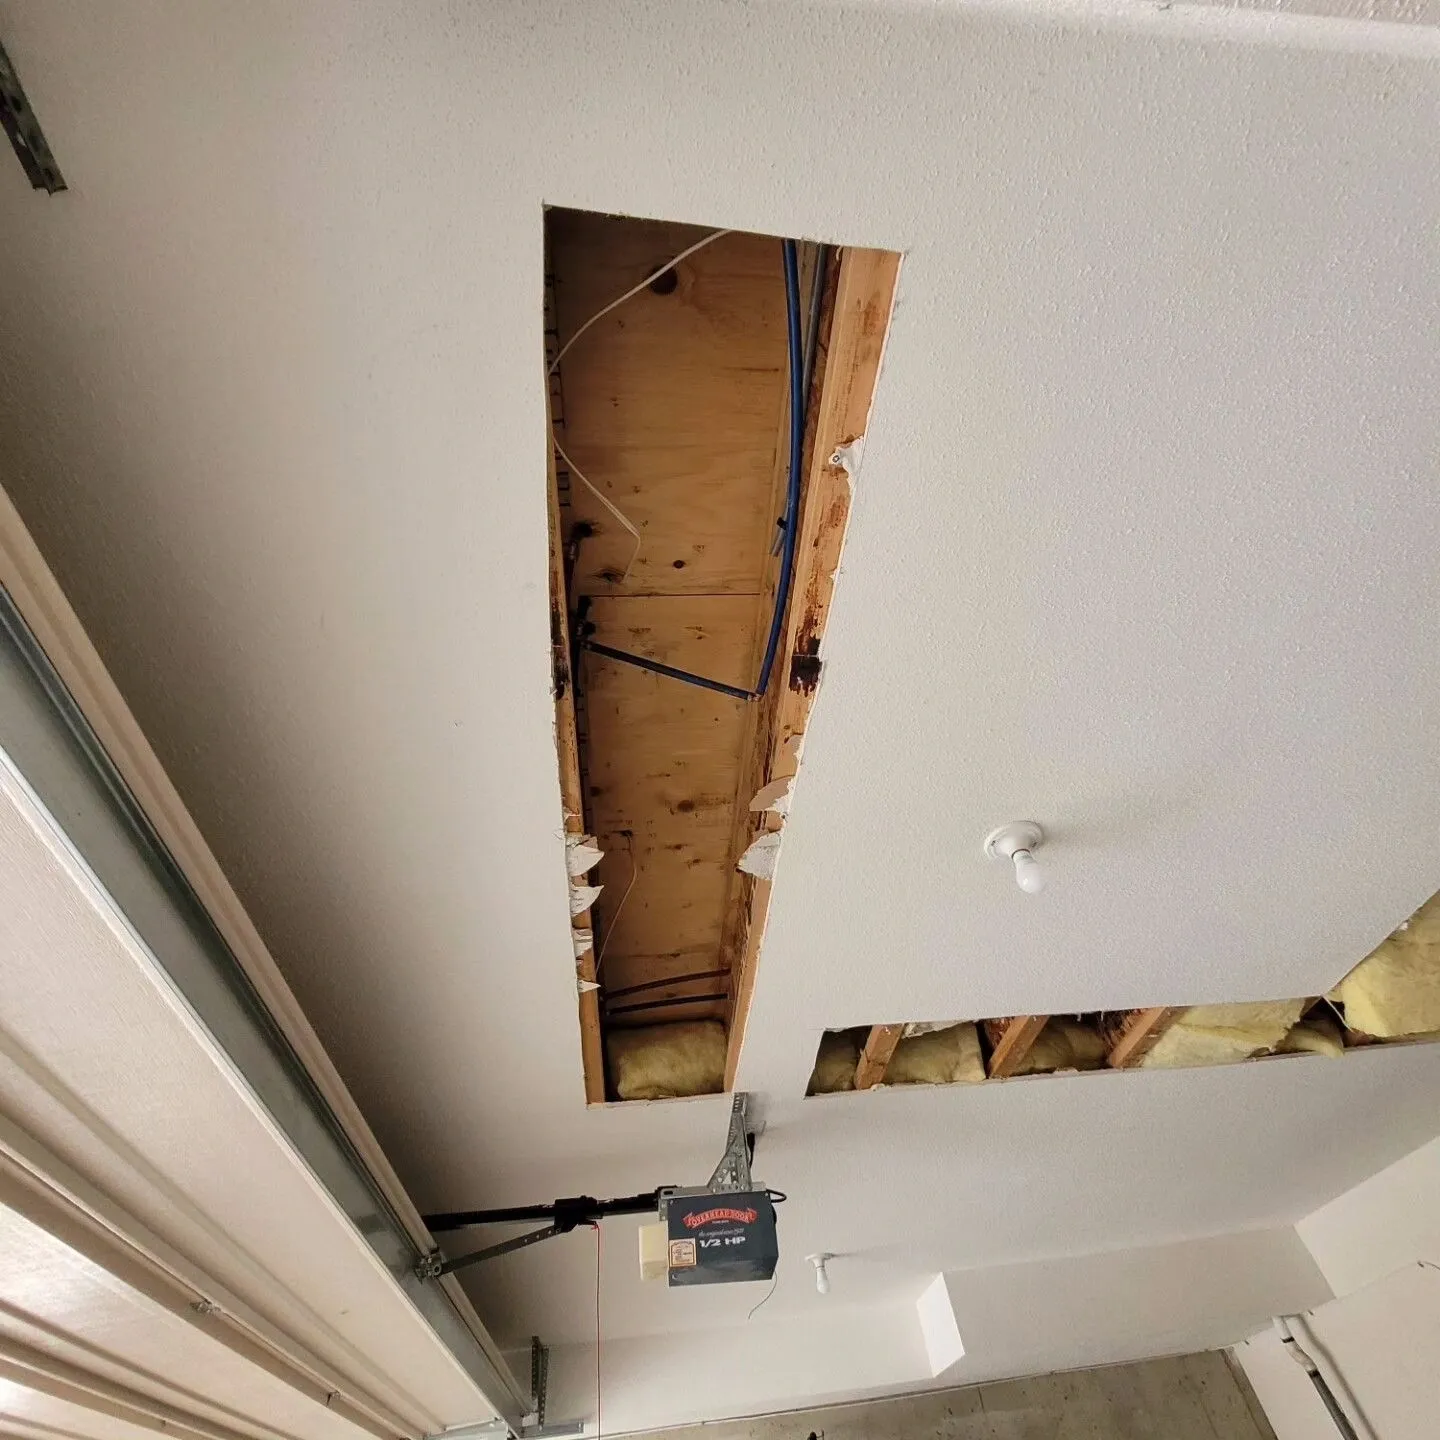 A ceiling that has been torn off and missing the support bars.